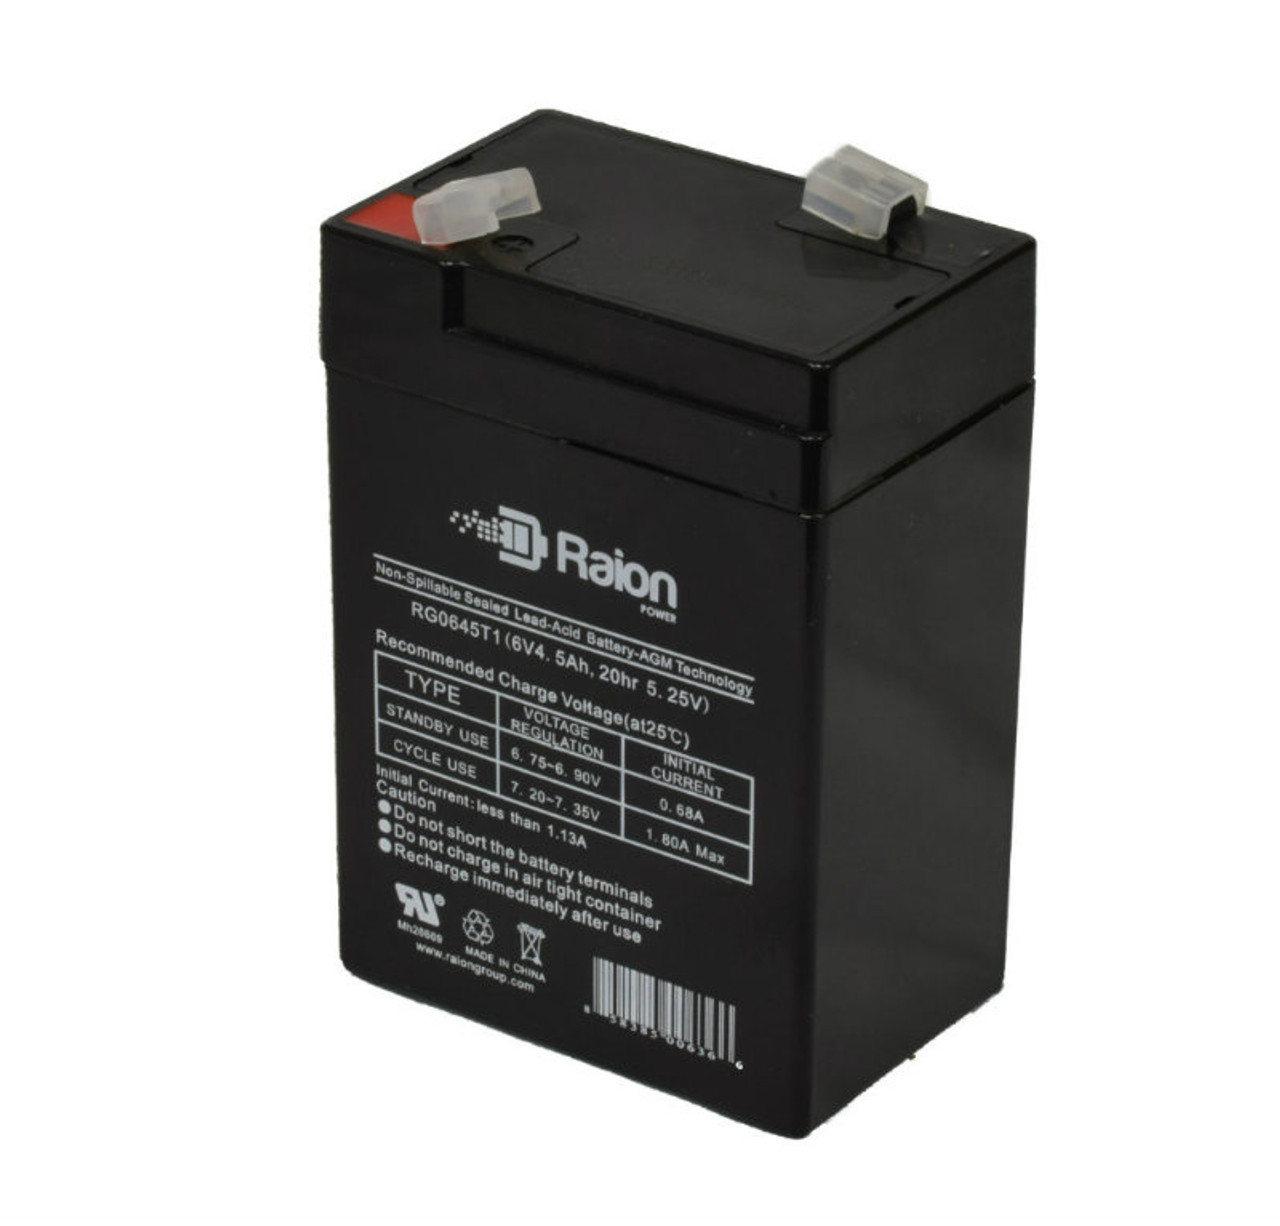 Raion Power RG0645T1 6V 4.5Ah Replacement Battery Cartridge for RSO SN06004.5